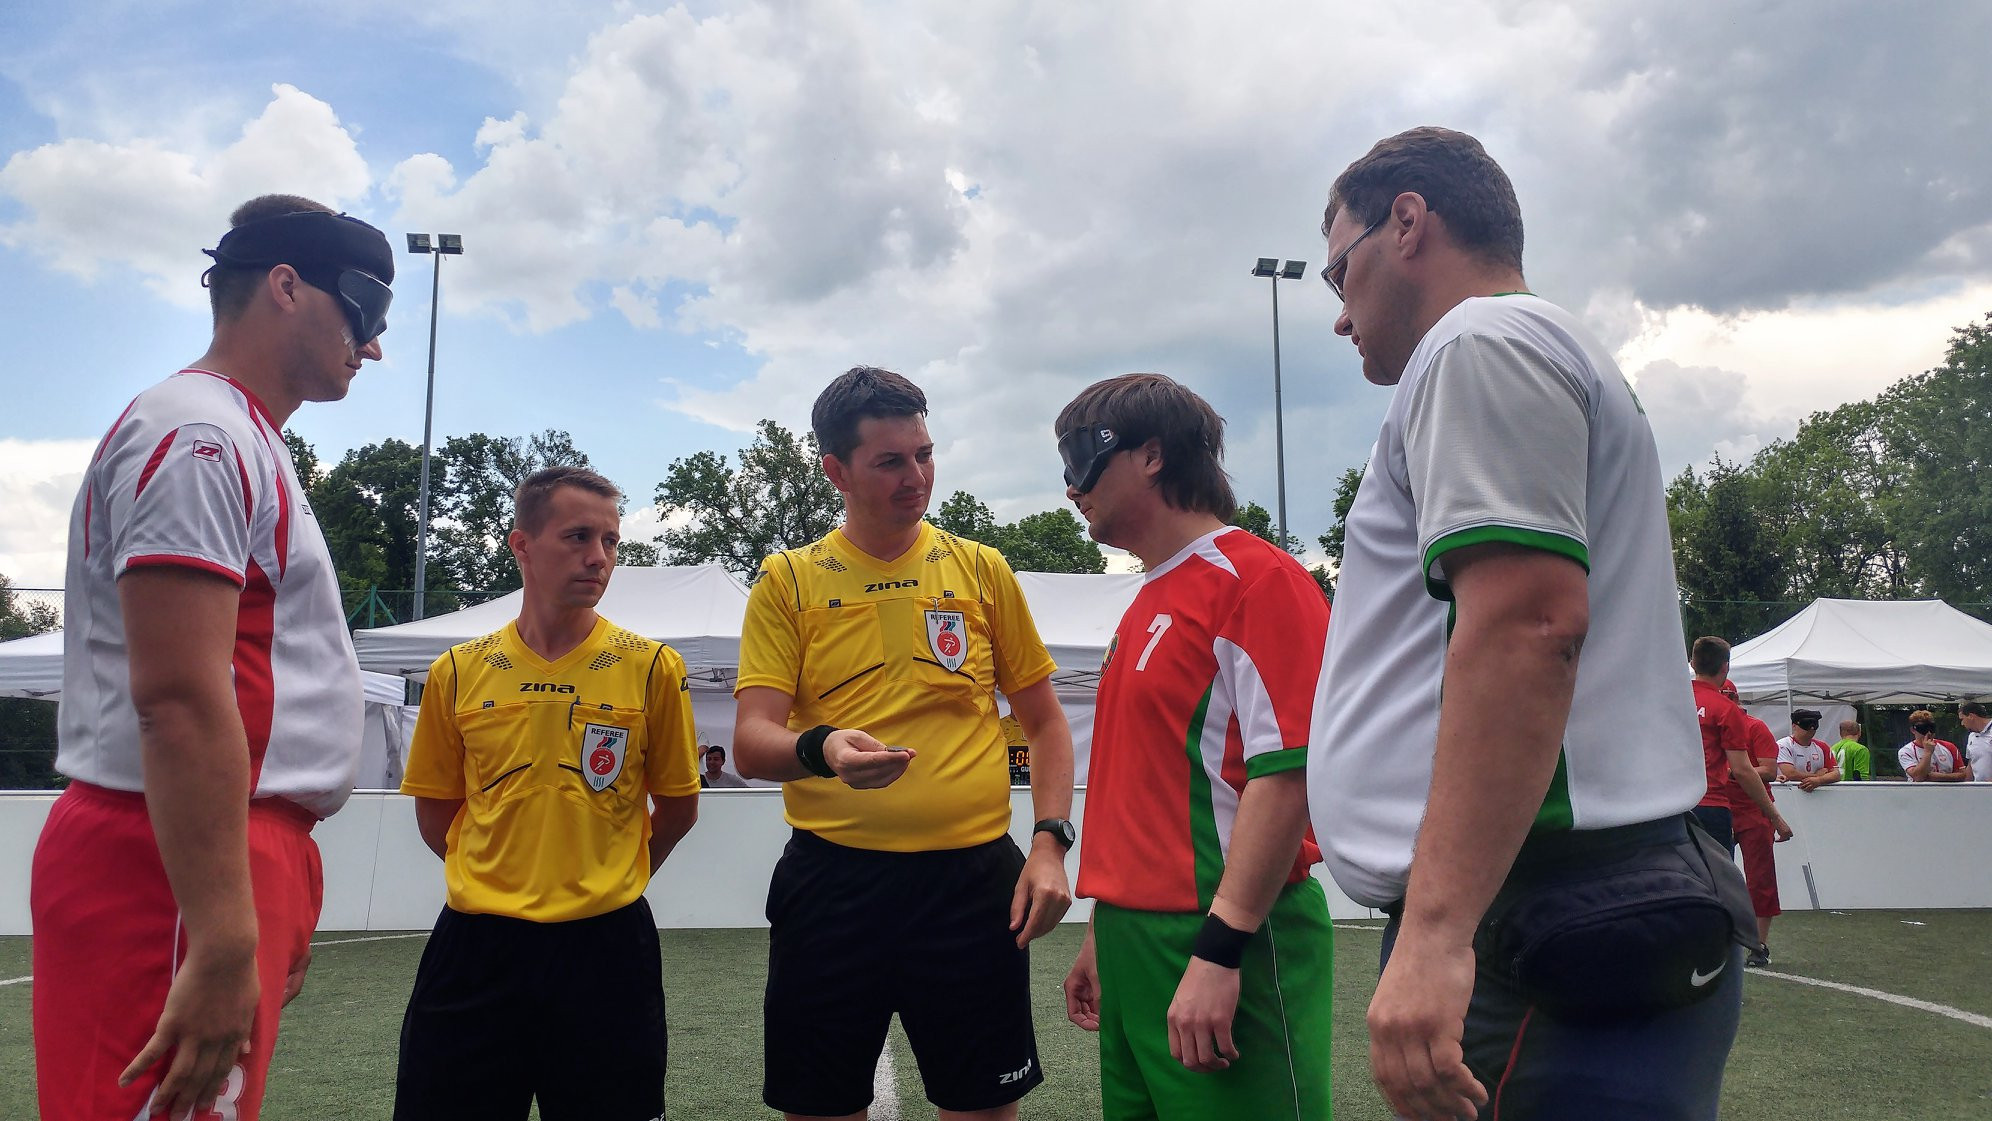 Hosts Poland booked their place in the final of the Blind Football Euro Challenge Cup ©IBSA